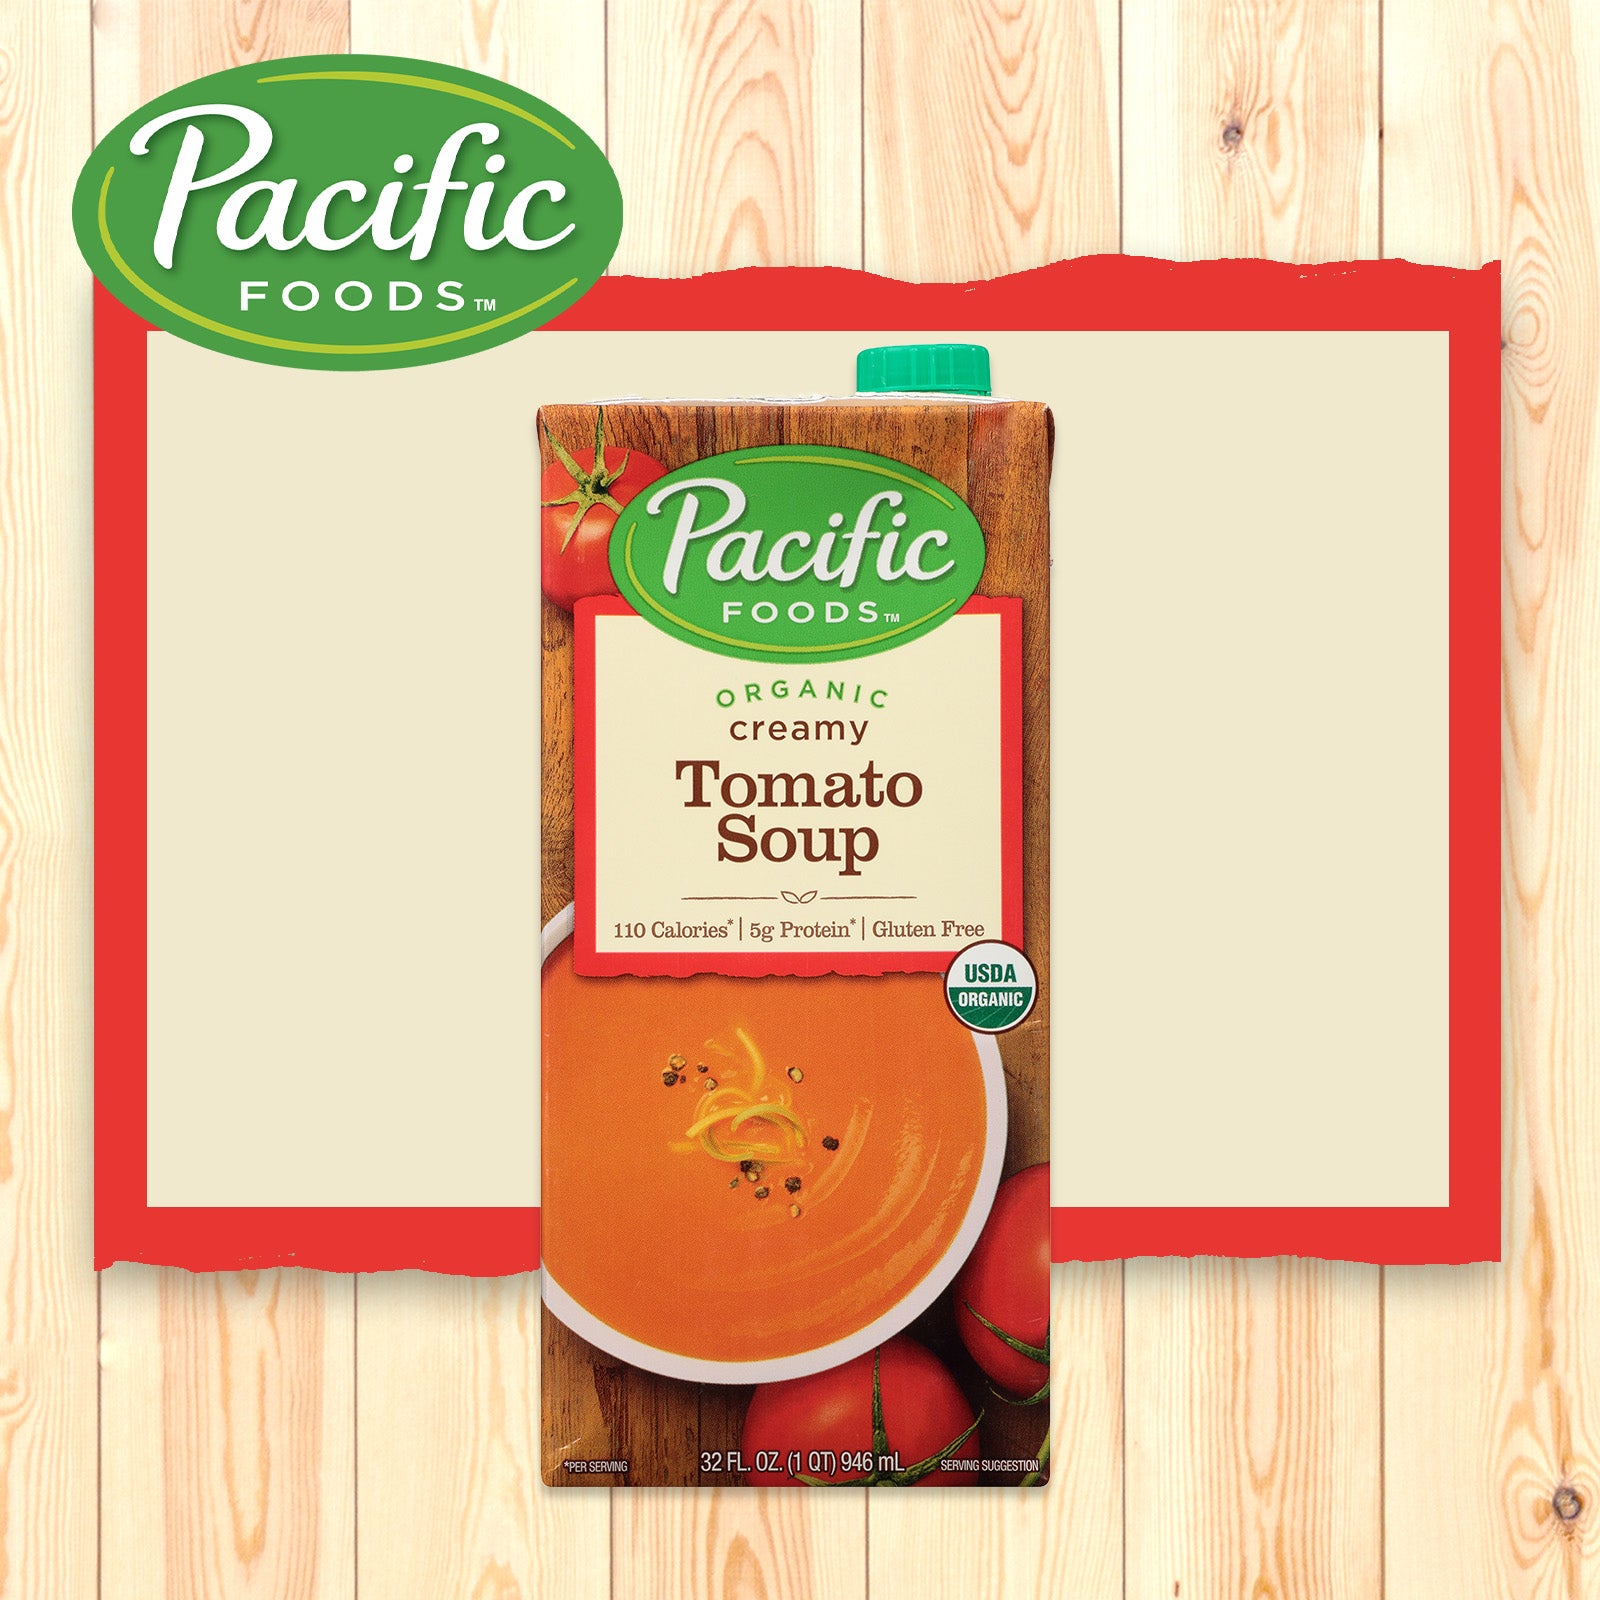 PACIFIC FOODS Organic Broth & Soup